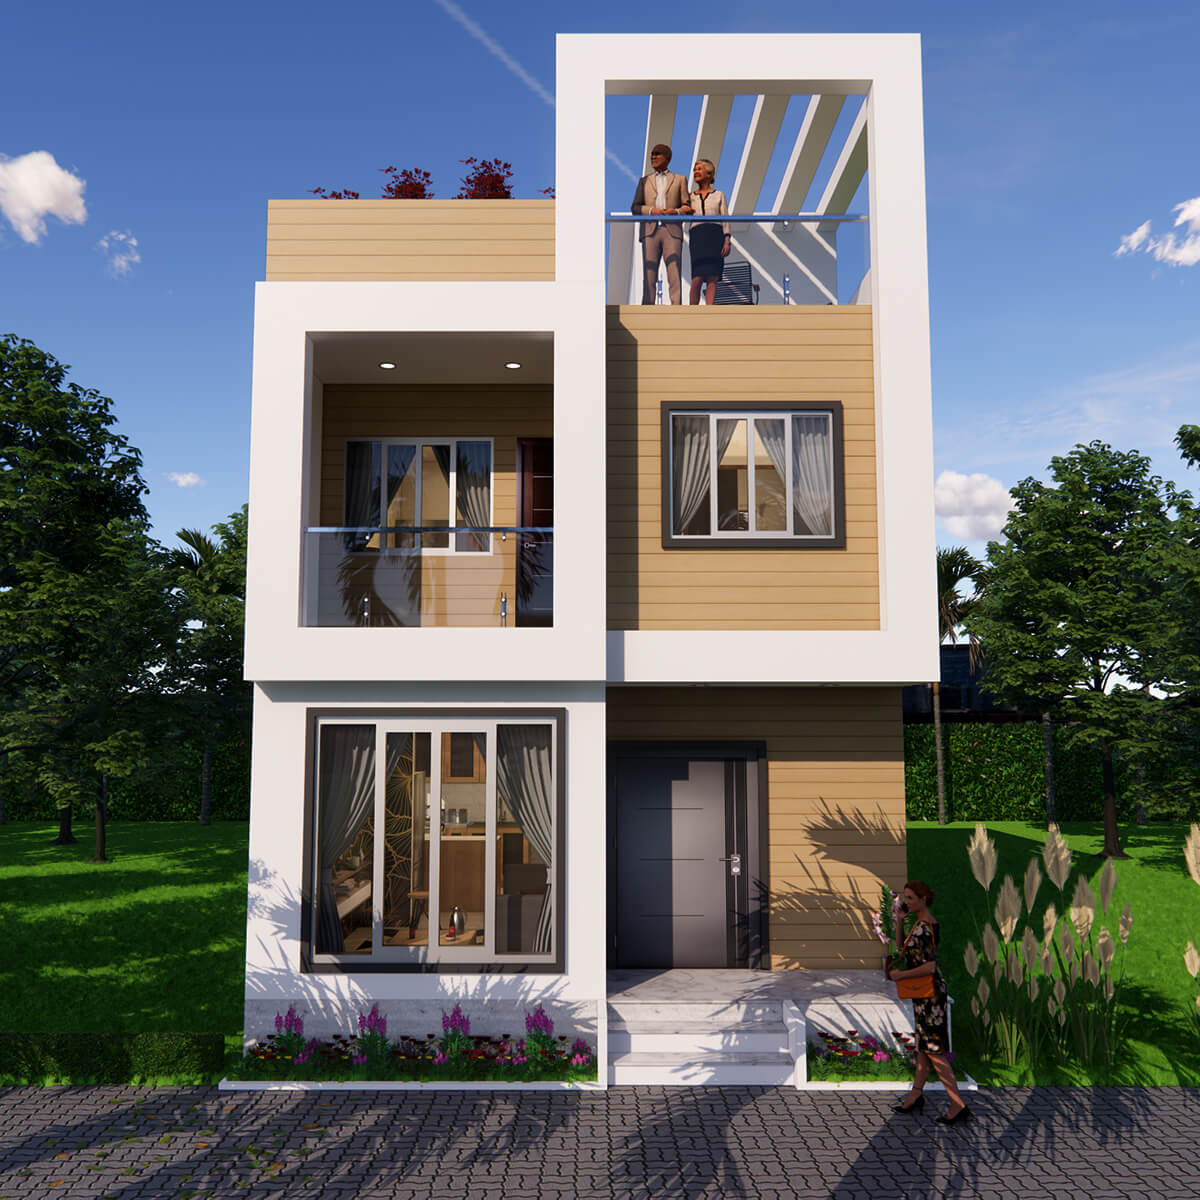 25 Feet Small Space House Design With 2 Bedroom Kk Home Design Store